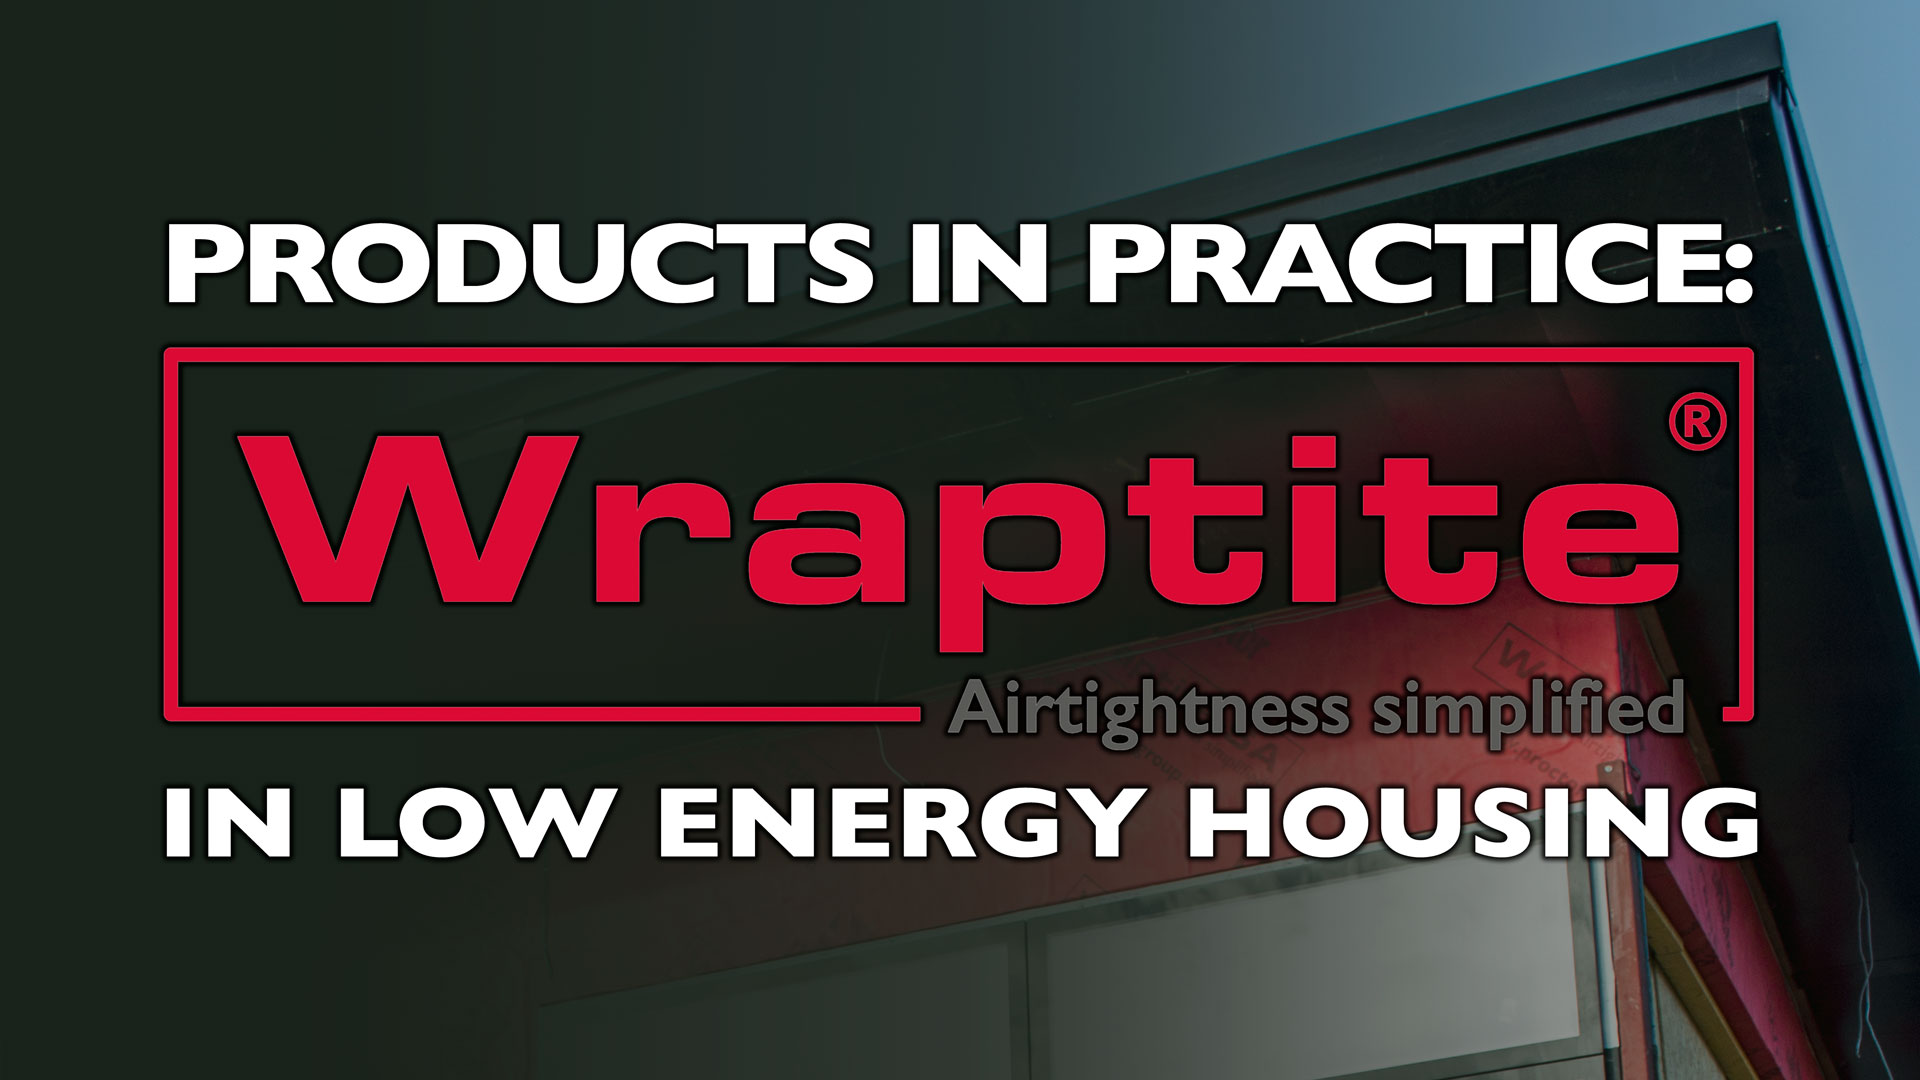 Welcome to our 30-minute webinar, "Wraptite In Low Energy Housing". The webinar is followed by a Live Zoom Q&A session hosted by our managing director Keira Proctor and our team of technical experts, joined by special guest and project architect David McFarlane of Allan Corfield Architects.